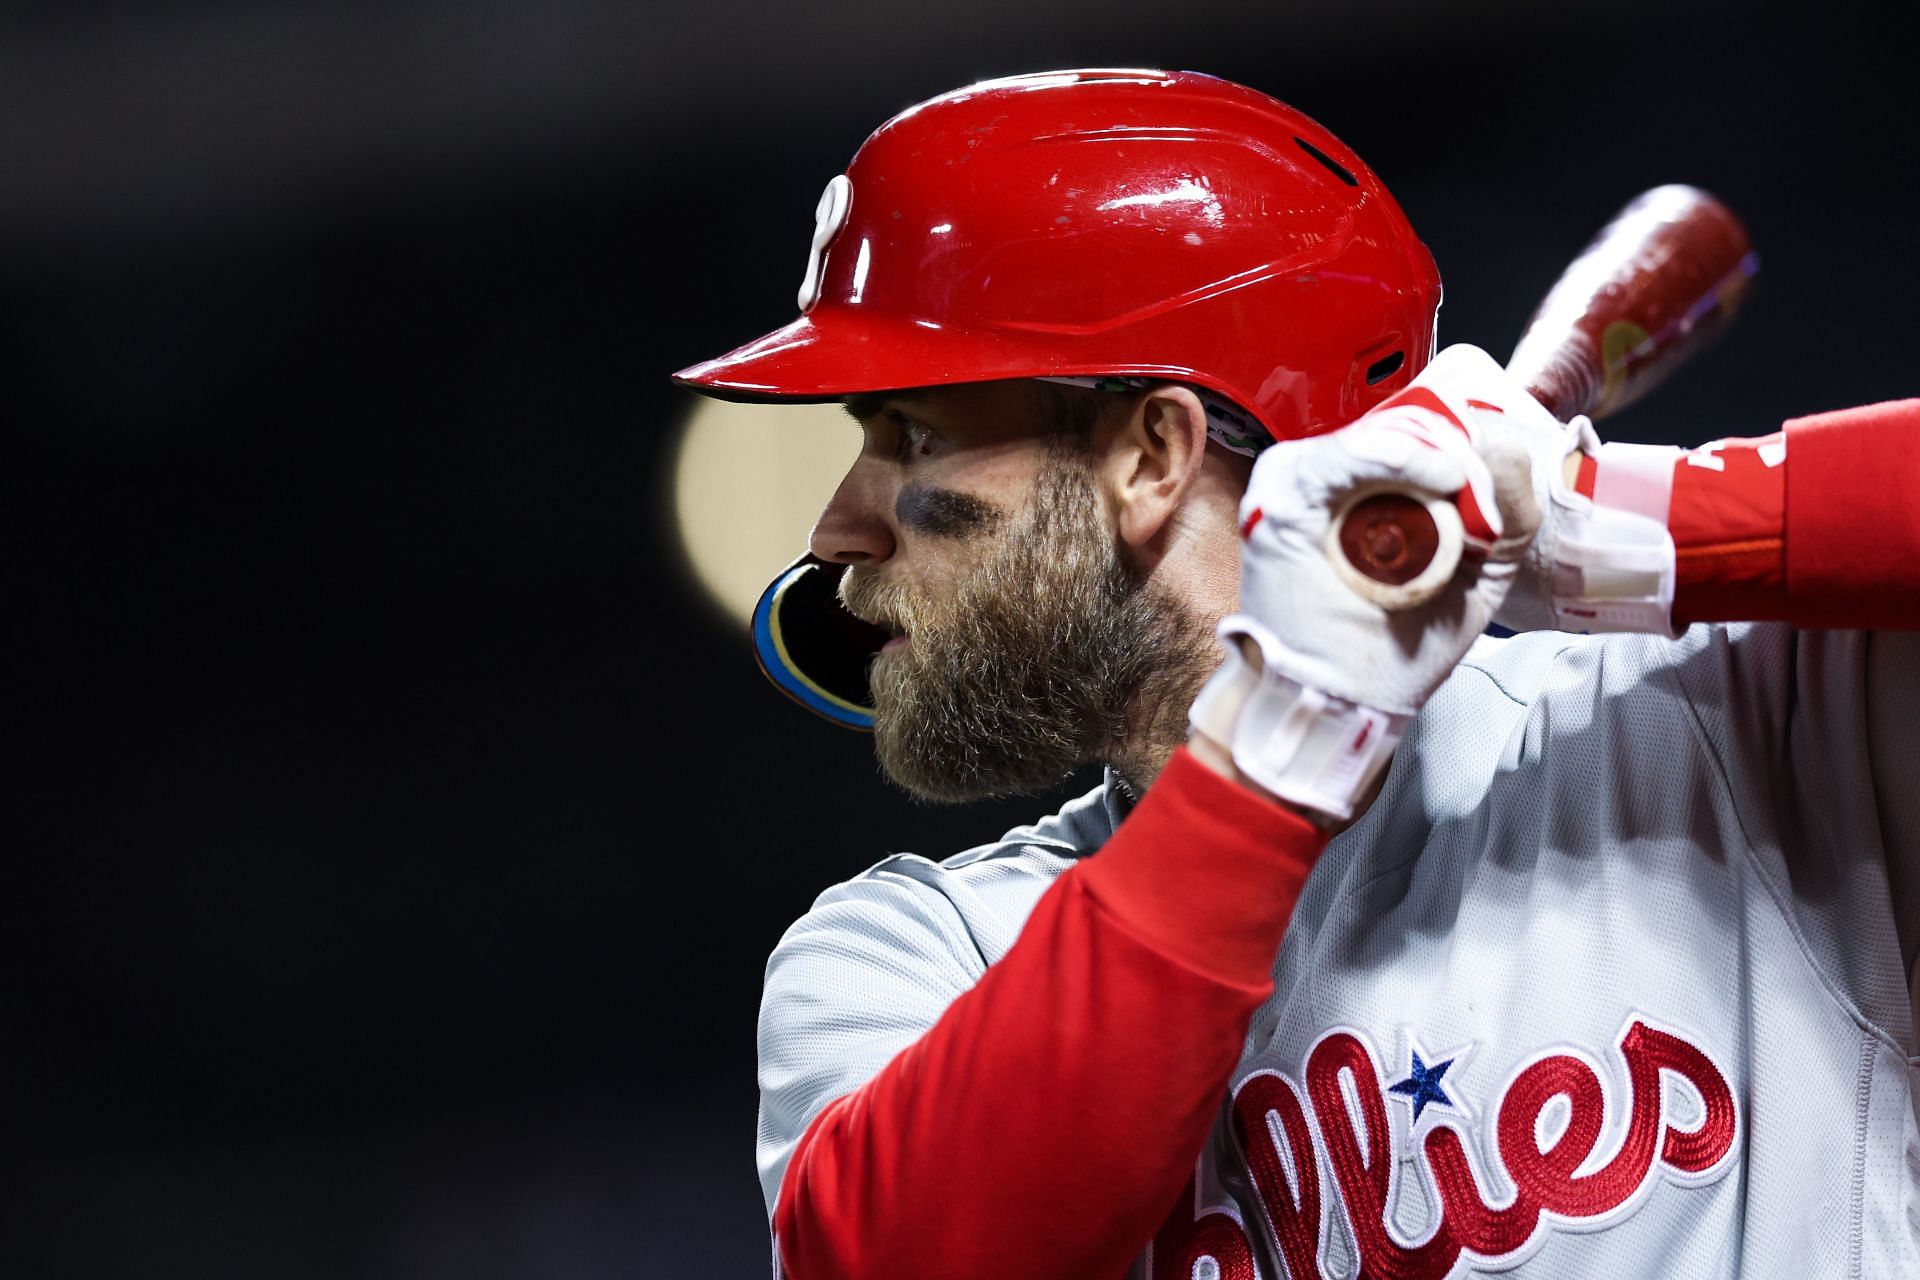 Bryce Harper is trying to will his team into the playoffs.